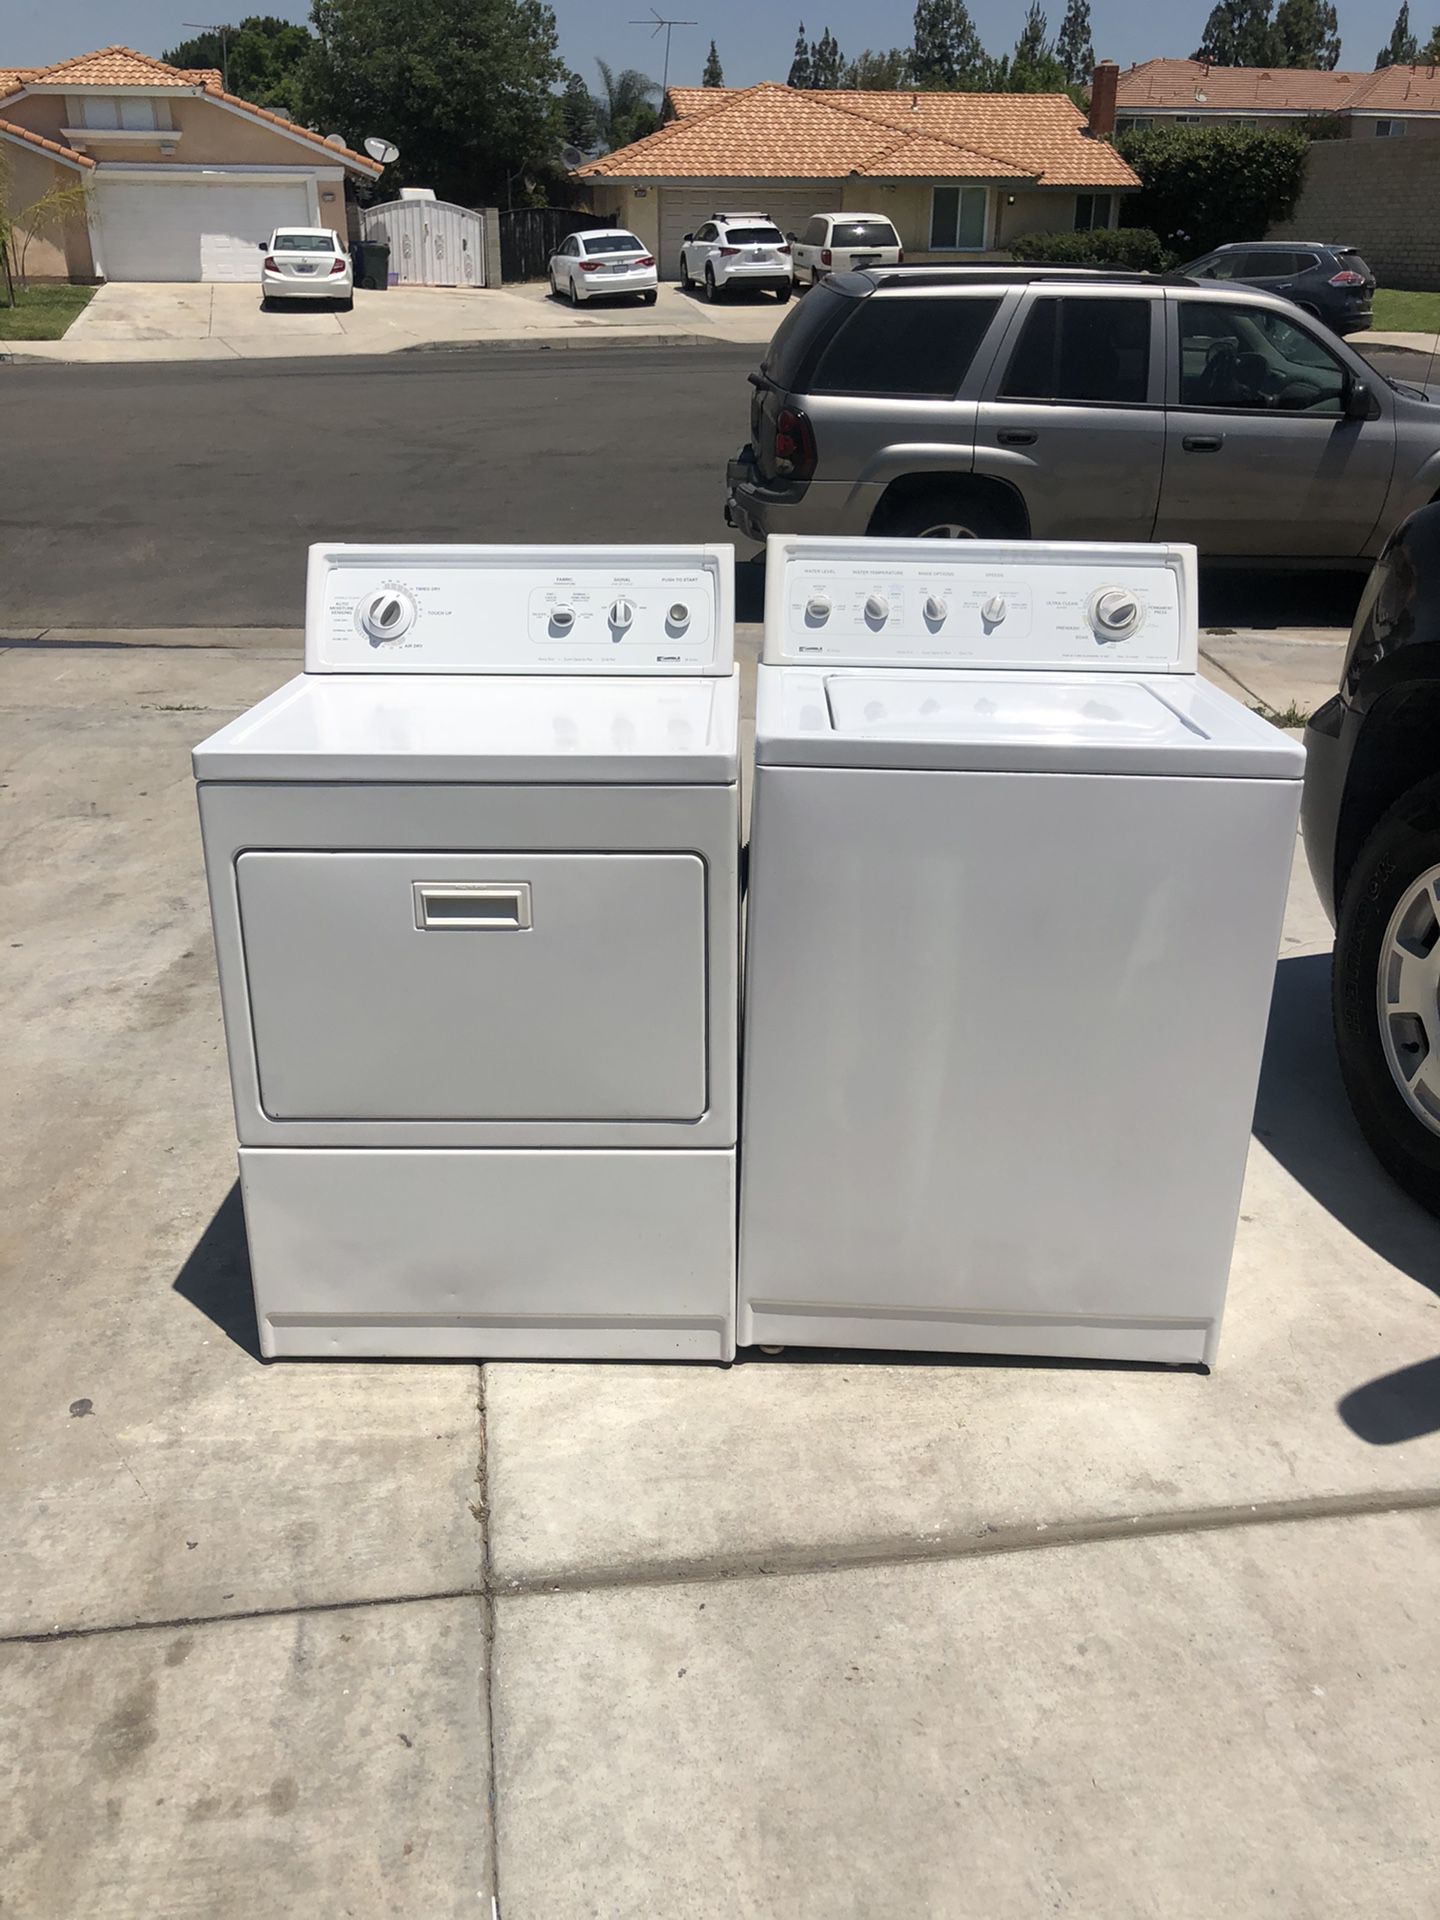 Kenmore 90 series washer and dryer gas heavy duty super capacity plus good condition deliver and installation available